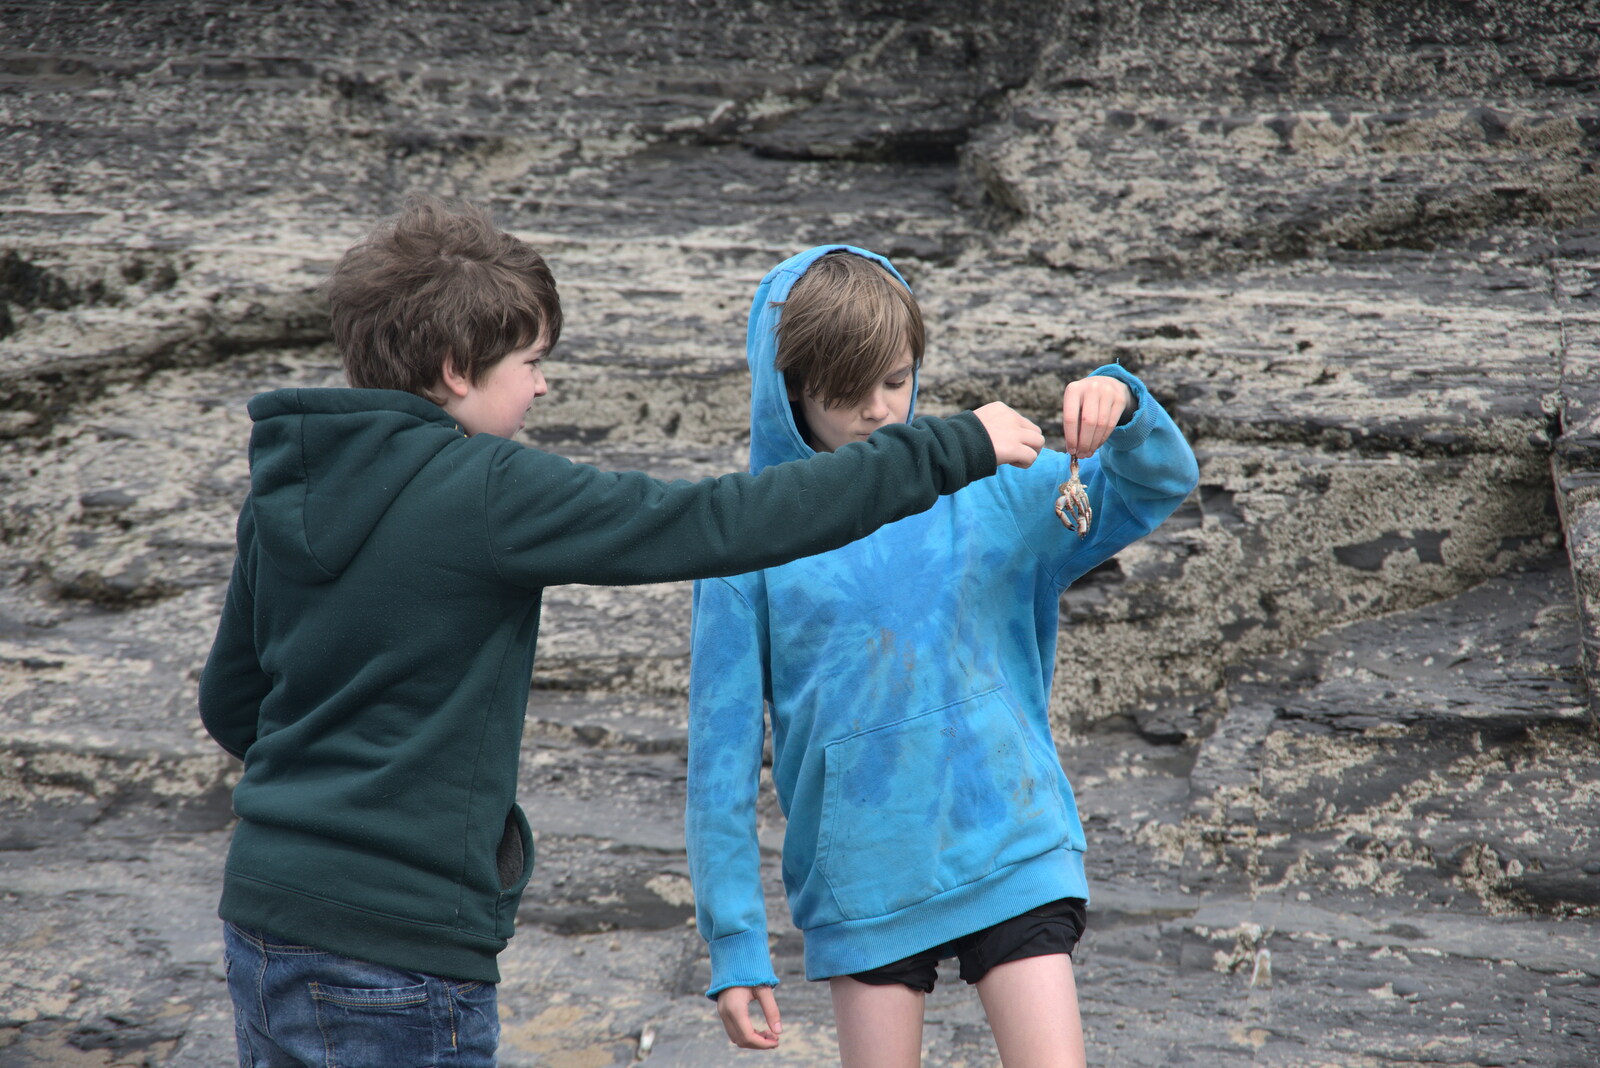 Harry finds a dead crab from Manorhamilton and Bundoran, Leitrim and Donegal, Ireland - 16th April 2022